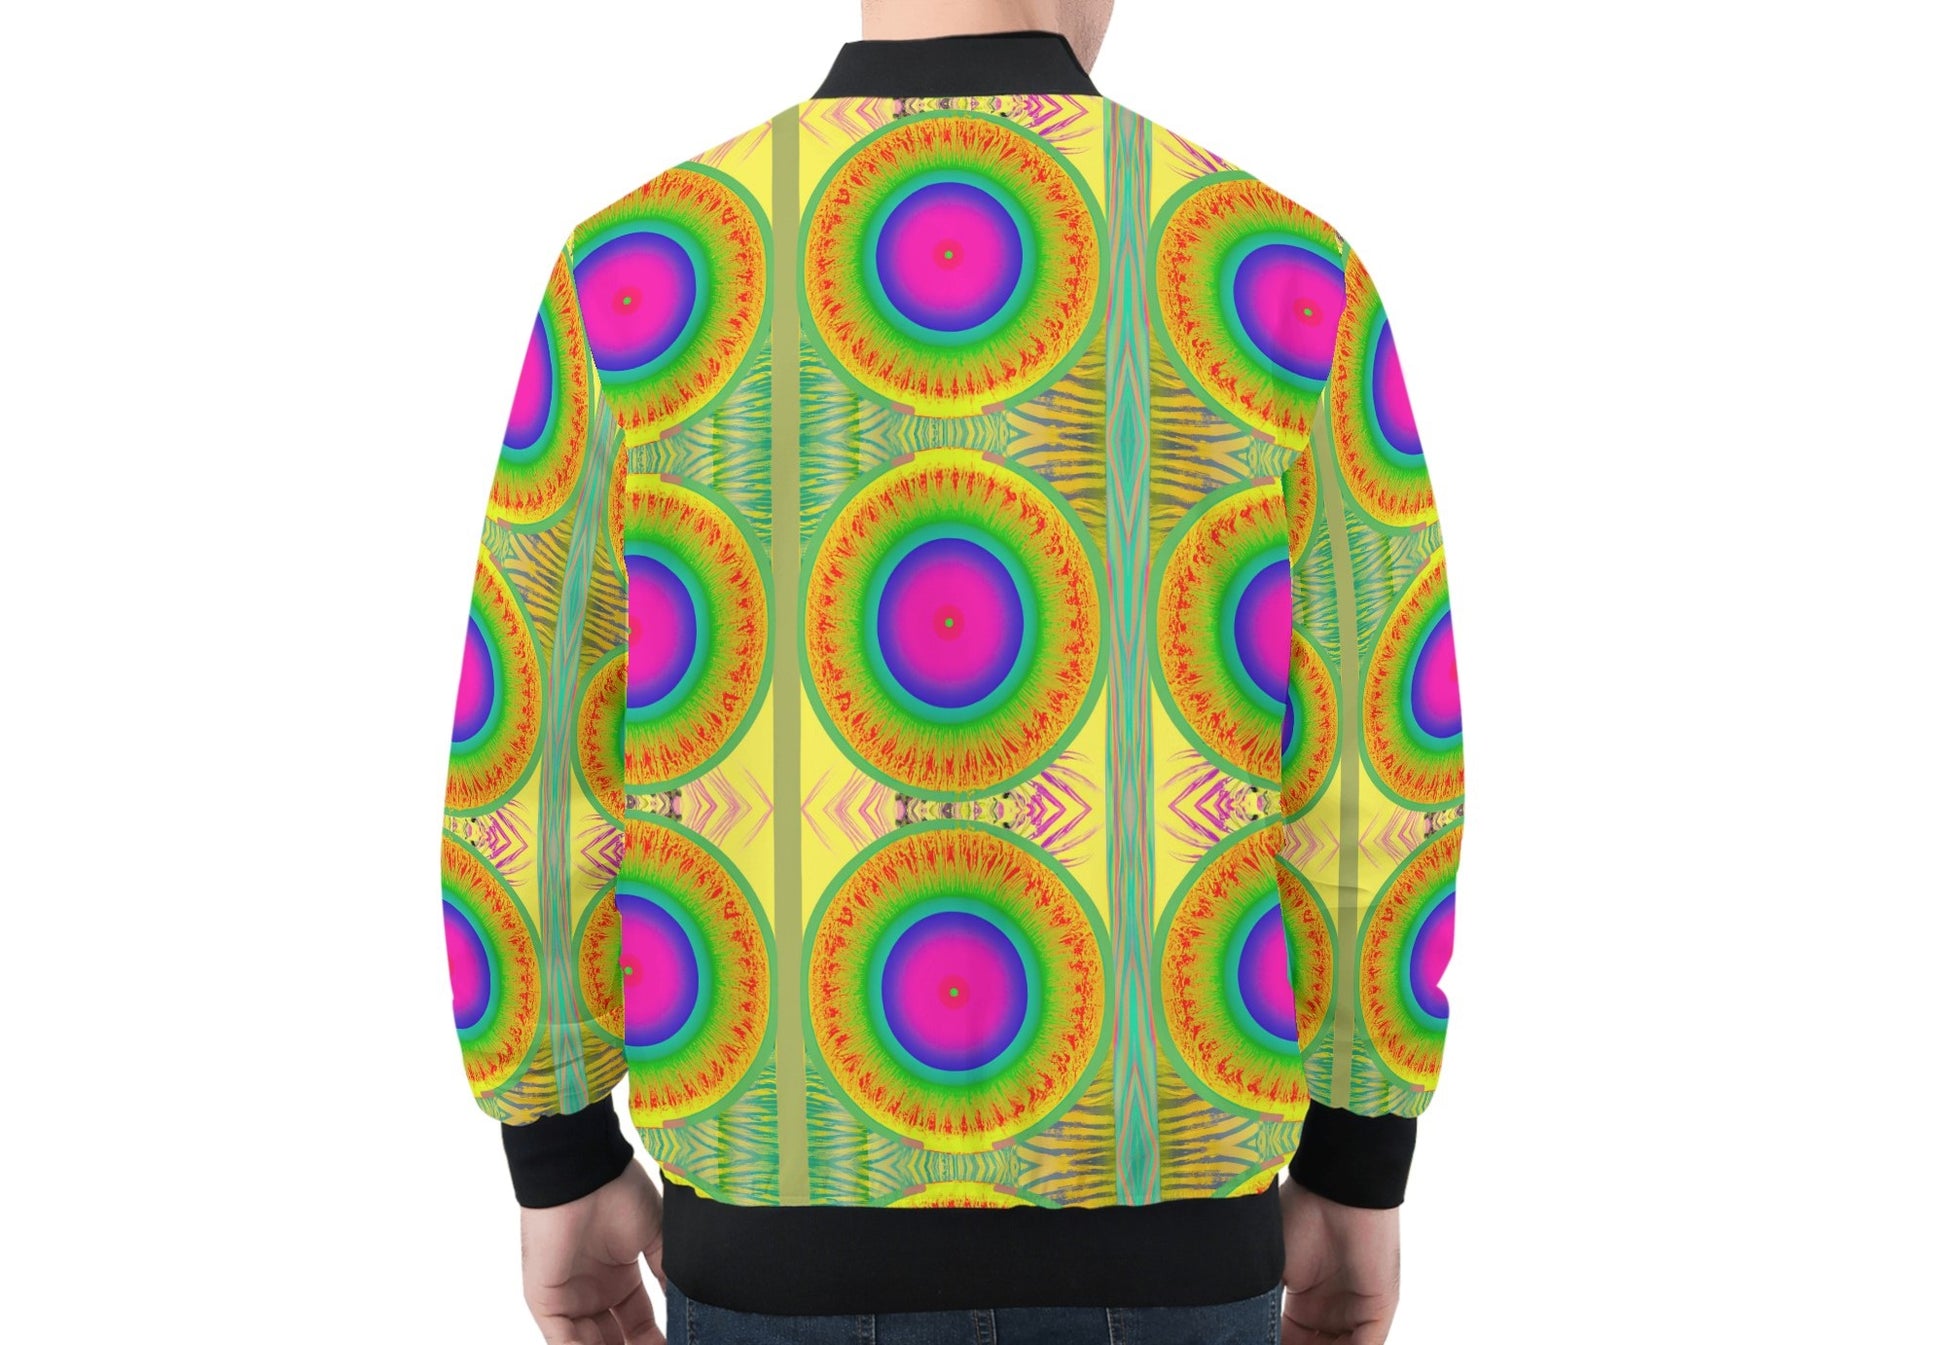 The intense colors and mesmerizing pattern give a clear proclamation of your individuality—a way to boldly express your bright persona. Created with meticulous attention to fit and comfort, this bomber jacket is a dazzling eye-catcher. Steal the spotlight and leave a permanent impression with the Psychedelia Dimension Neon Burn Men's Bomber Jacket!